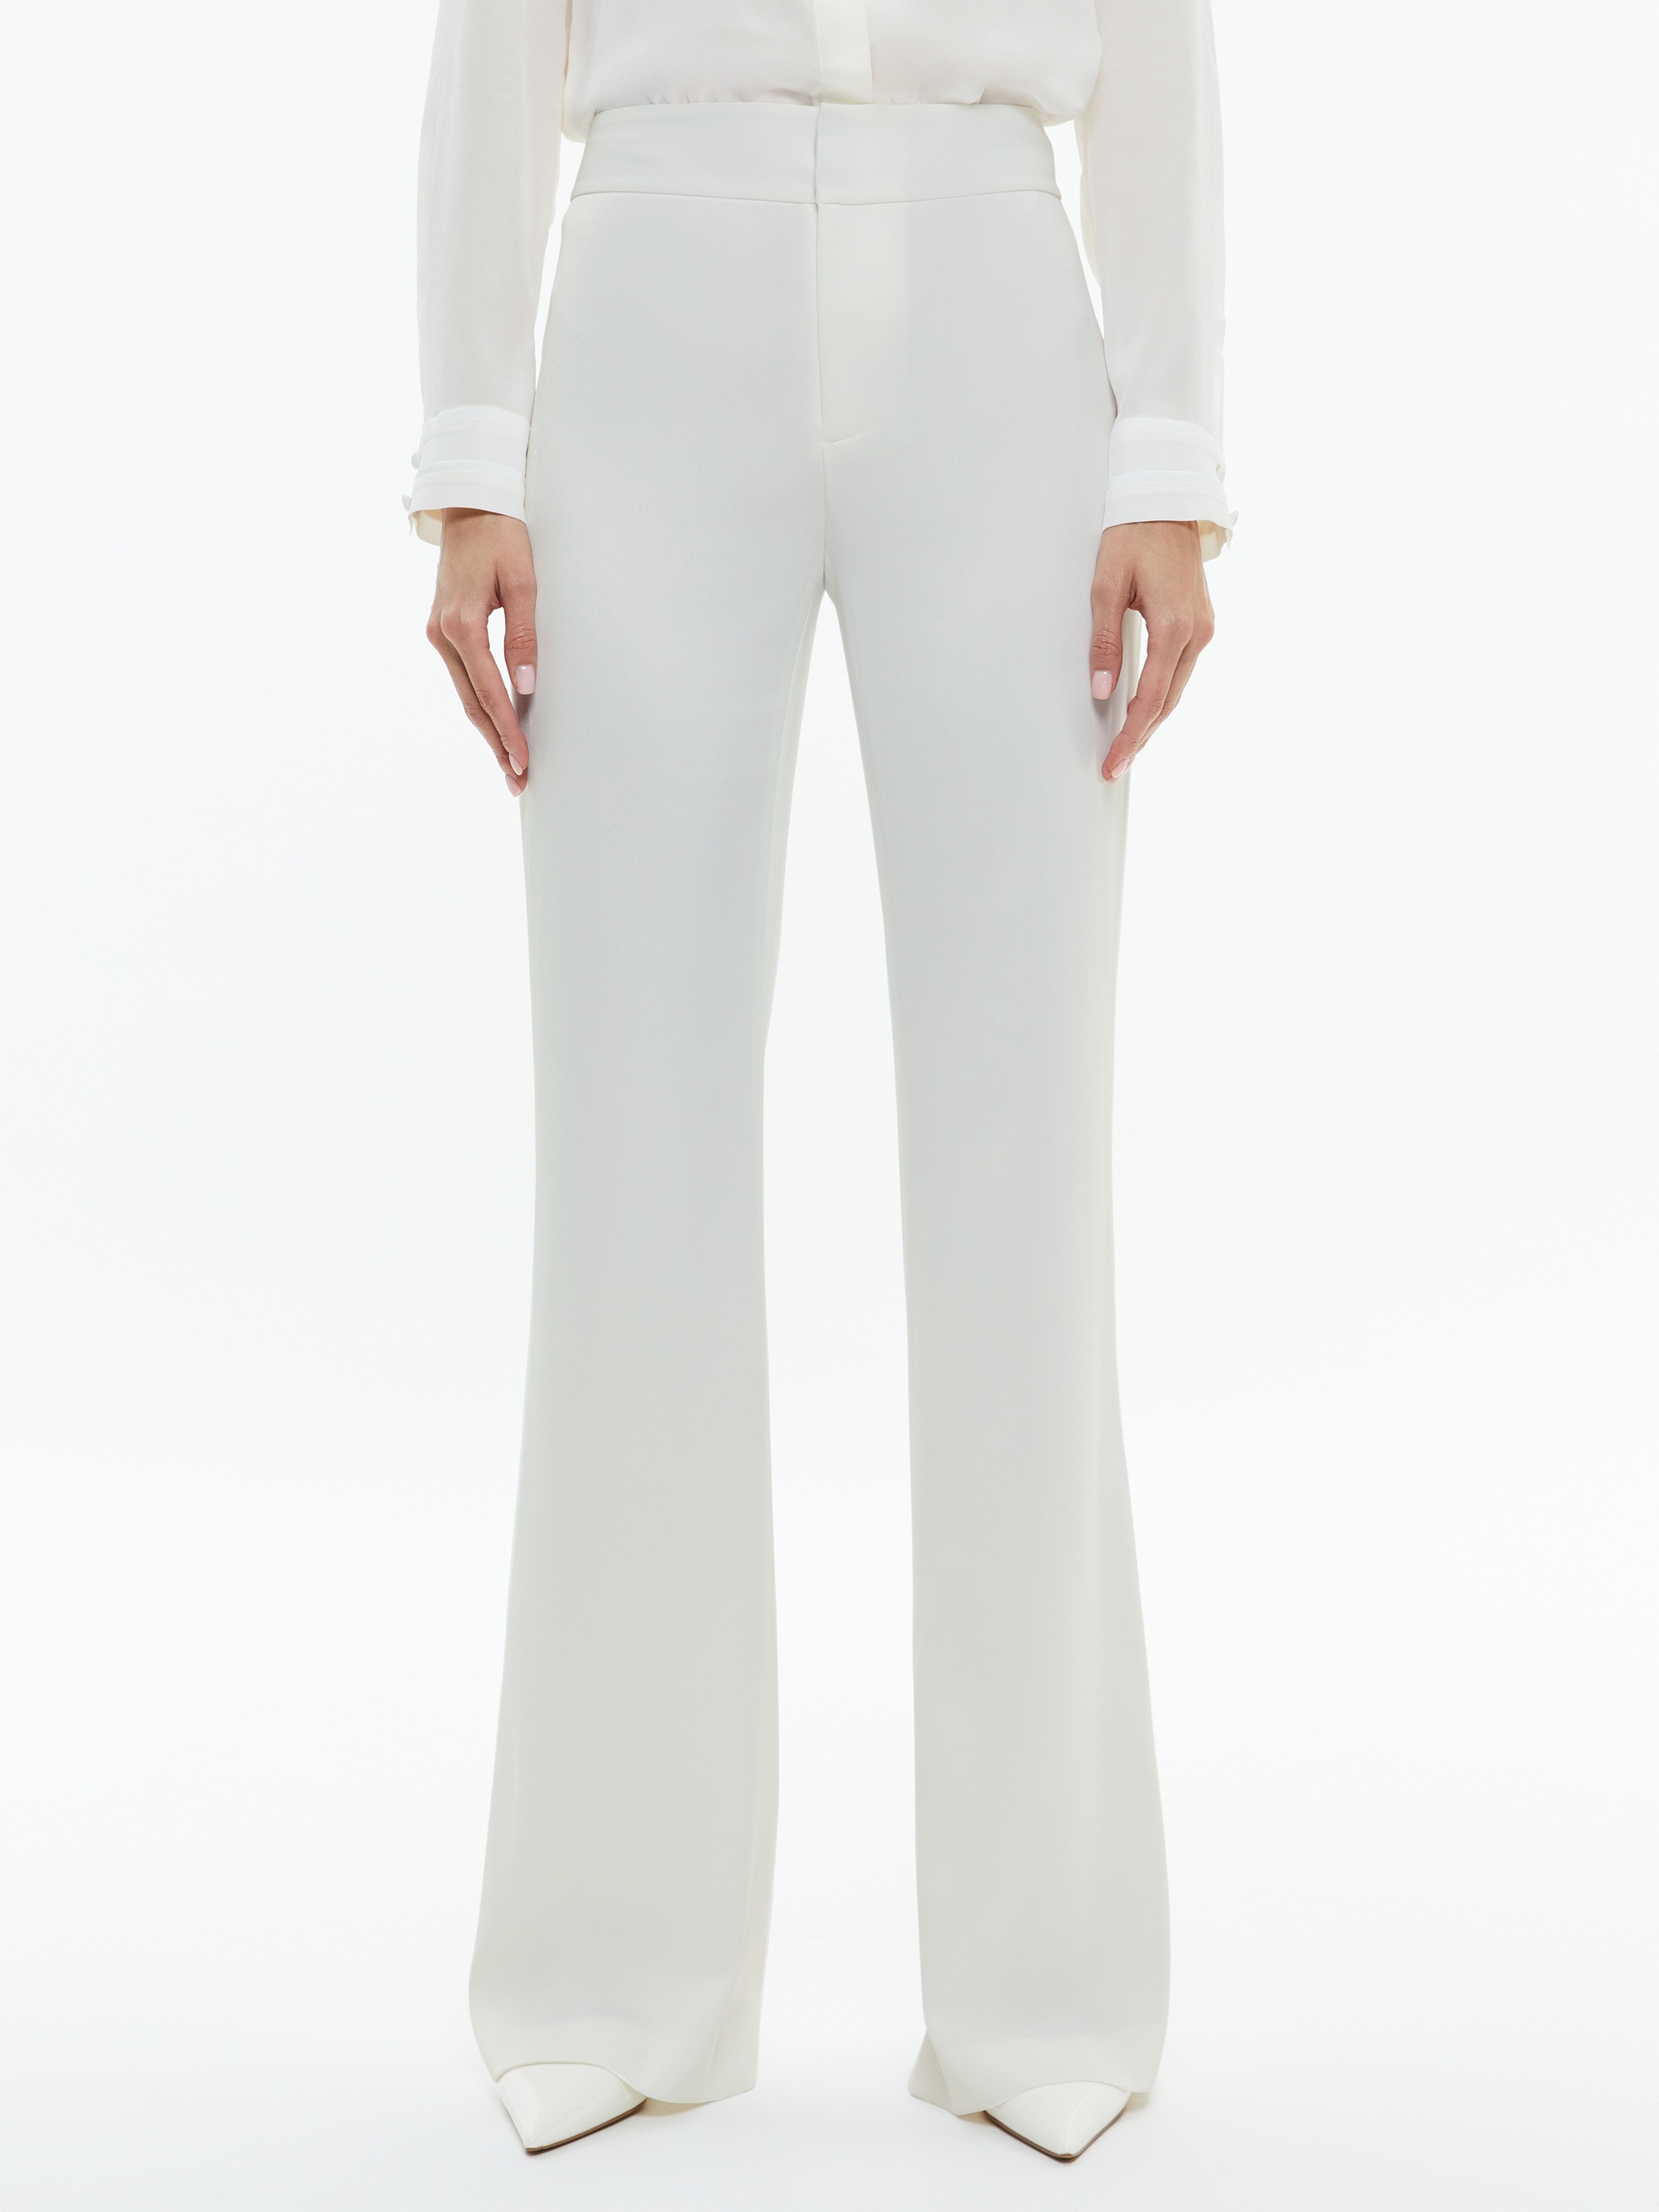 ANDREW MID RISE BOOTCUT PANT - 2